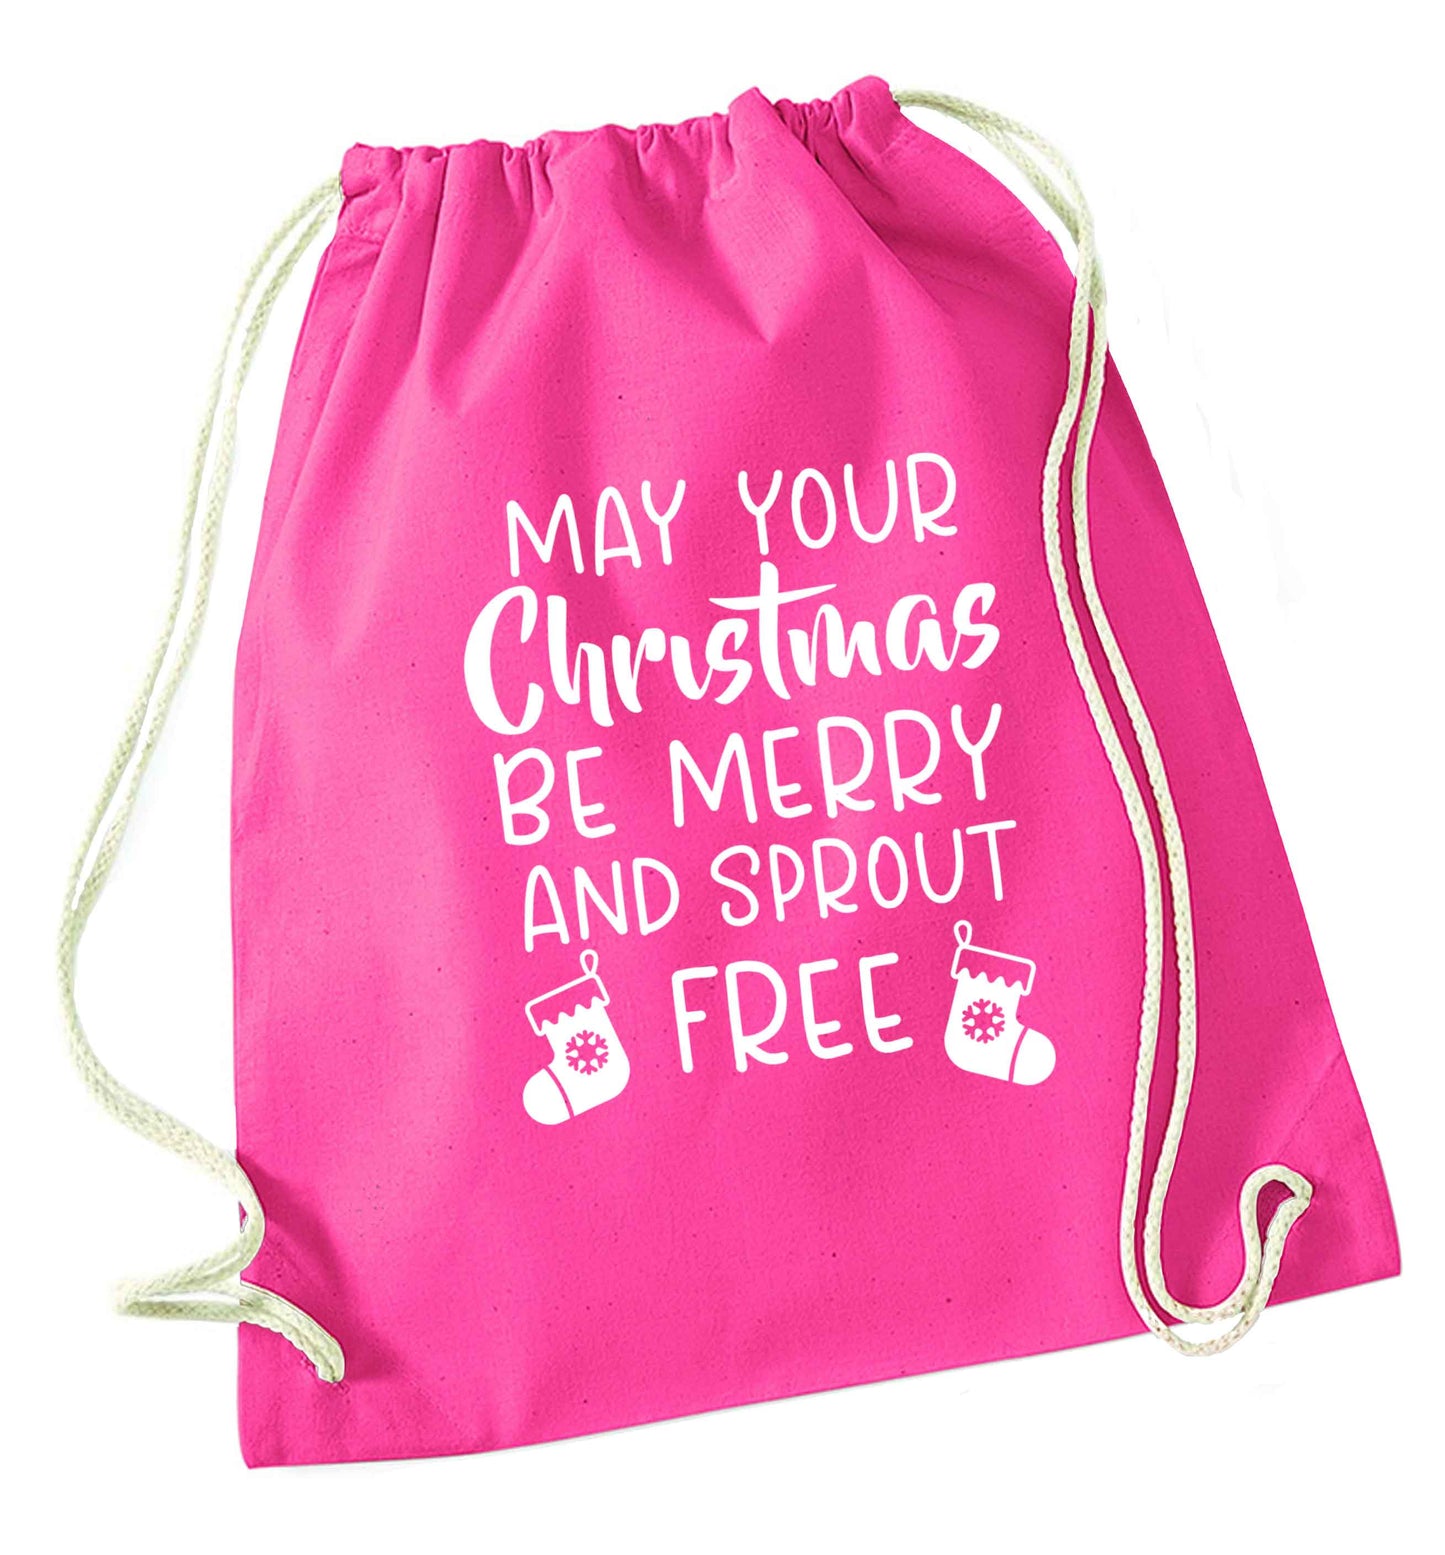 May your Christmas be merry and sprout free pink drawstring bag